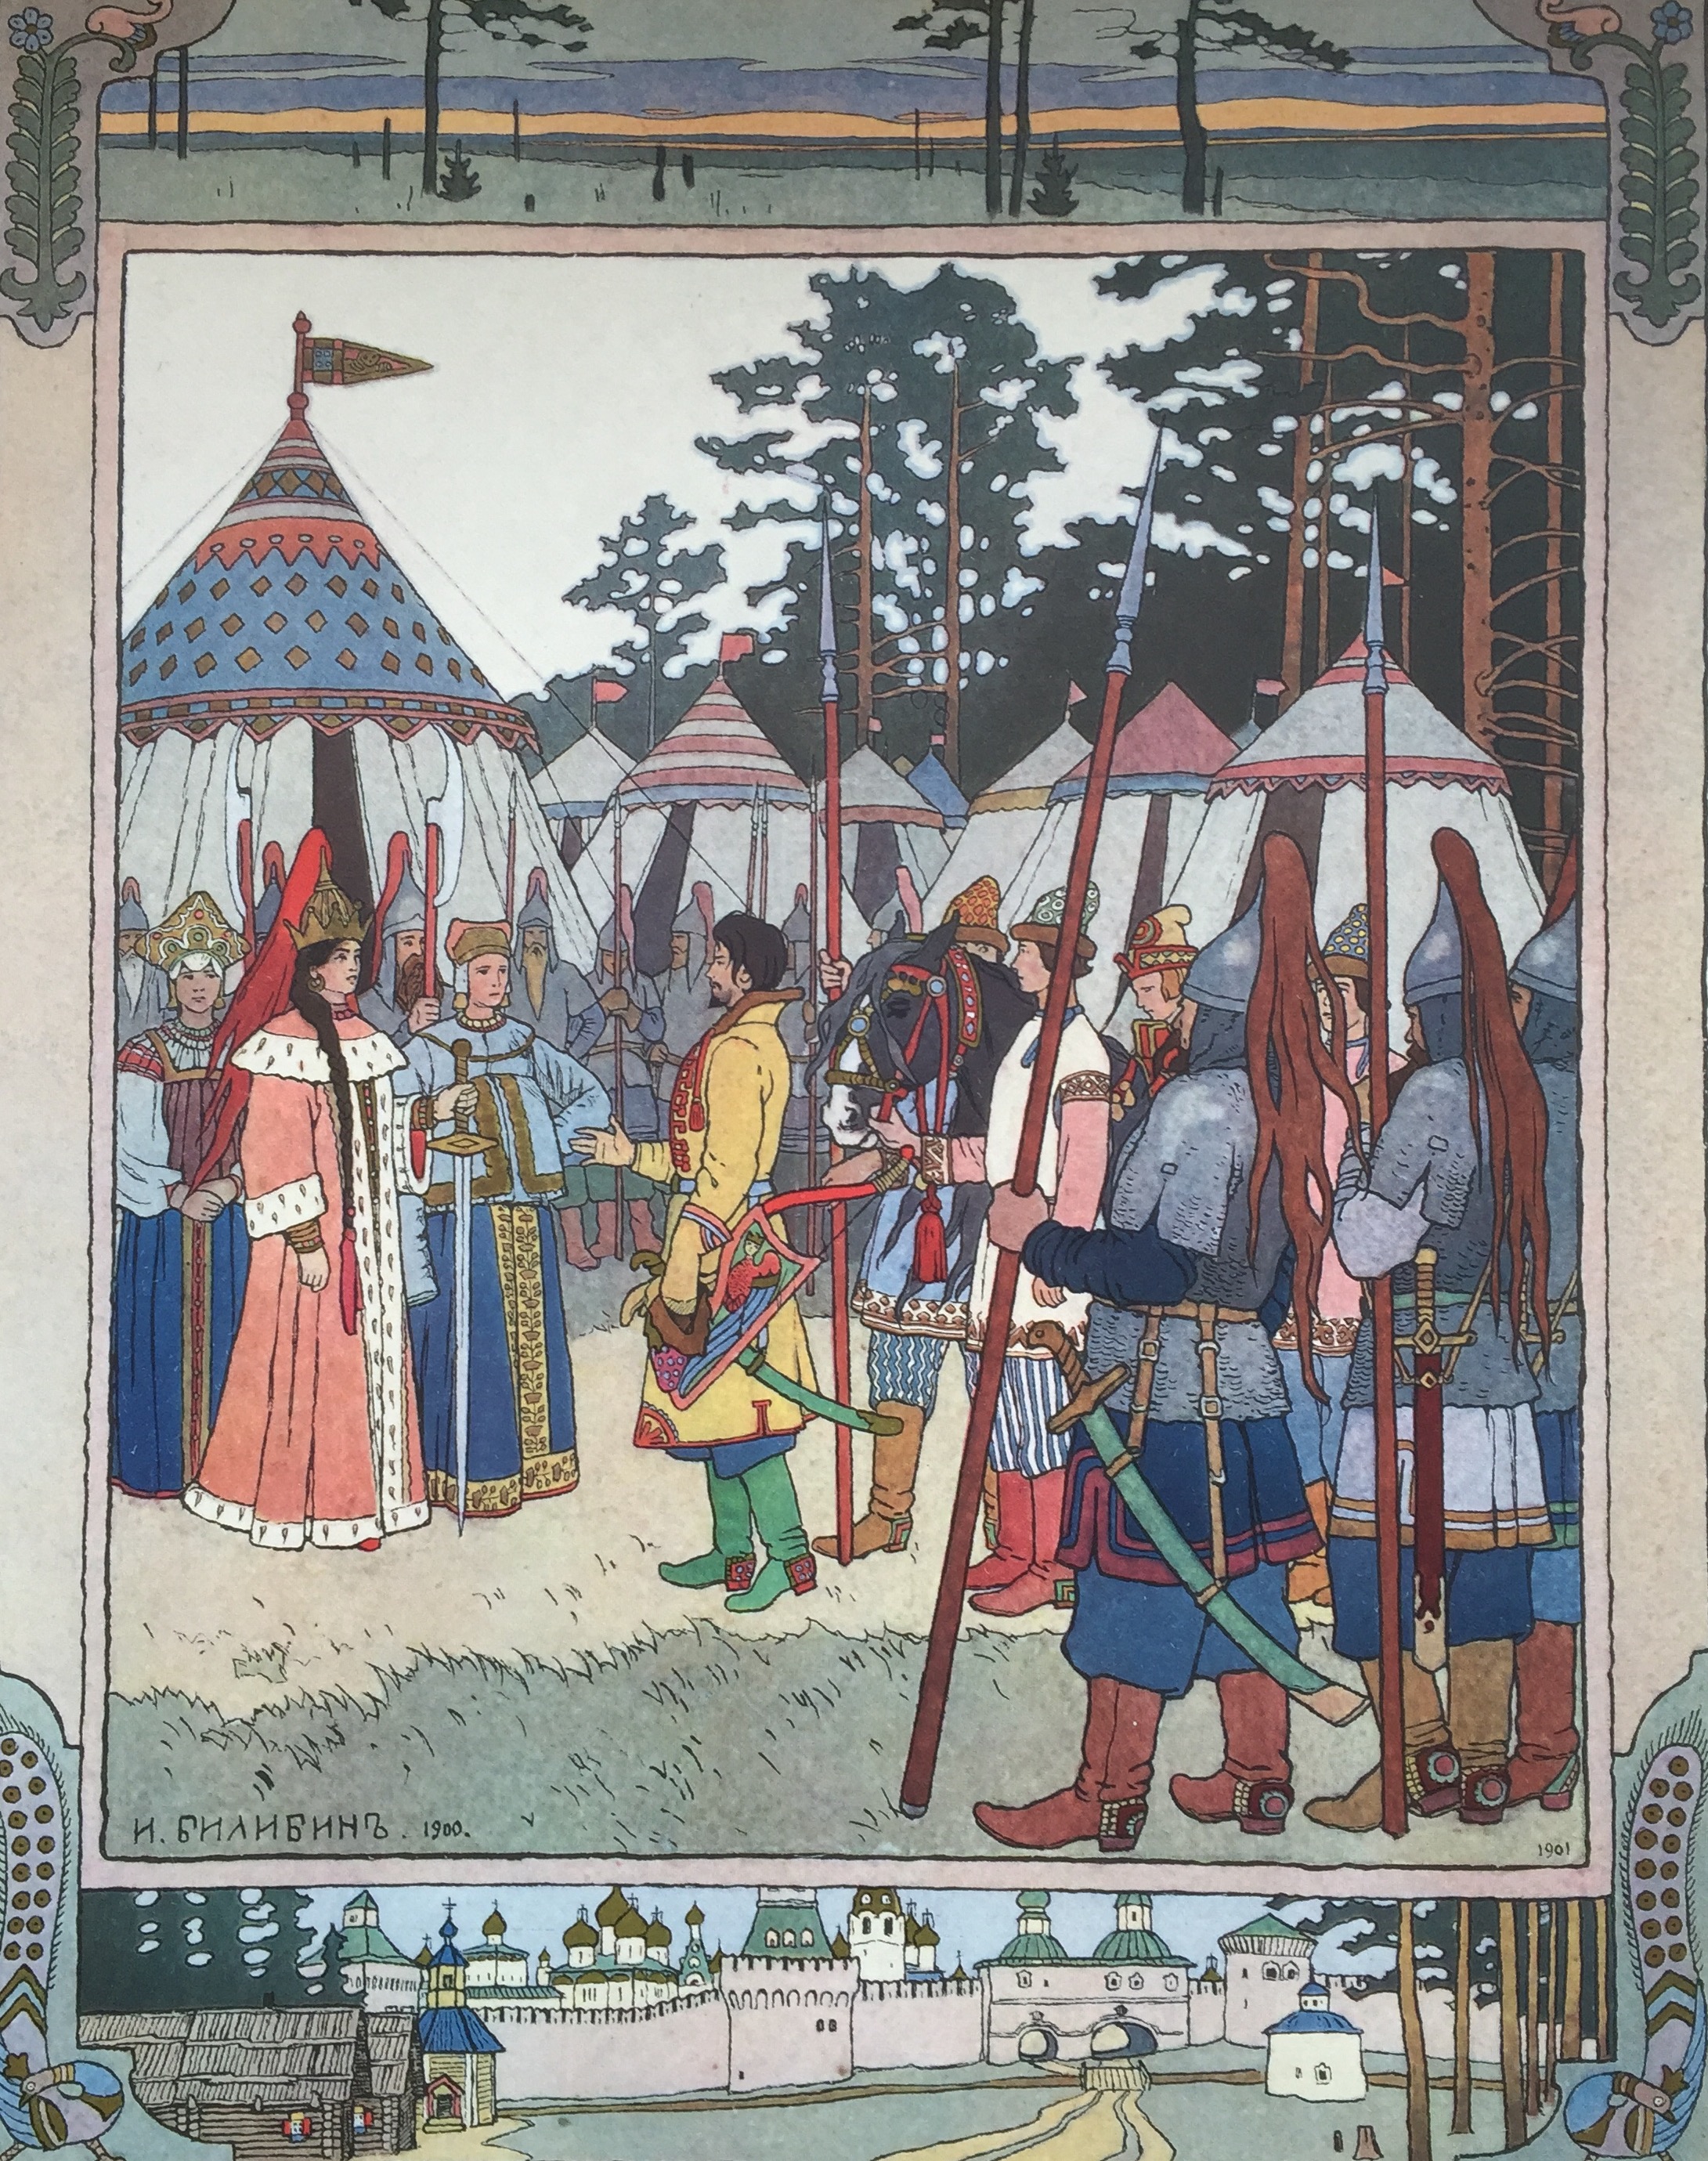 Marja Morevna, the warrior queen, greets her handsome visitor. From Marja Morevna, a Russian Fairy Tale by Ivan Bilibin.